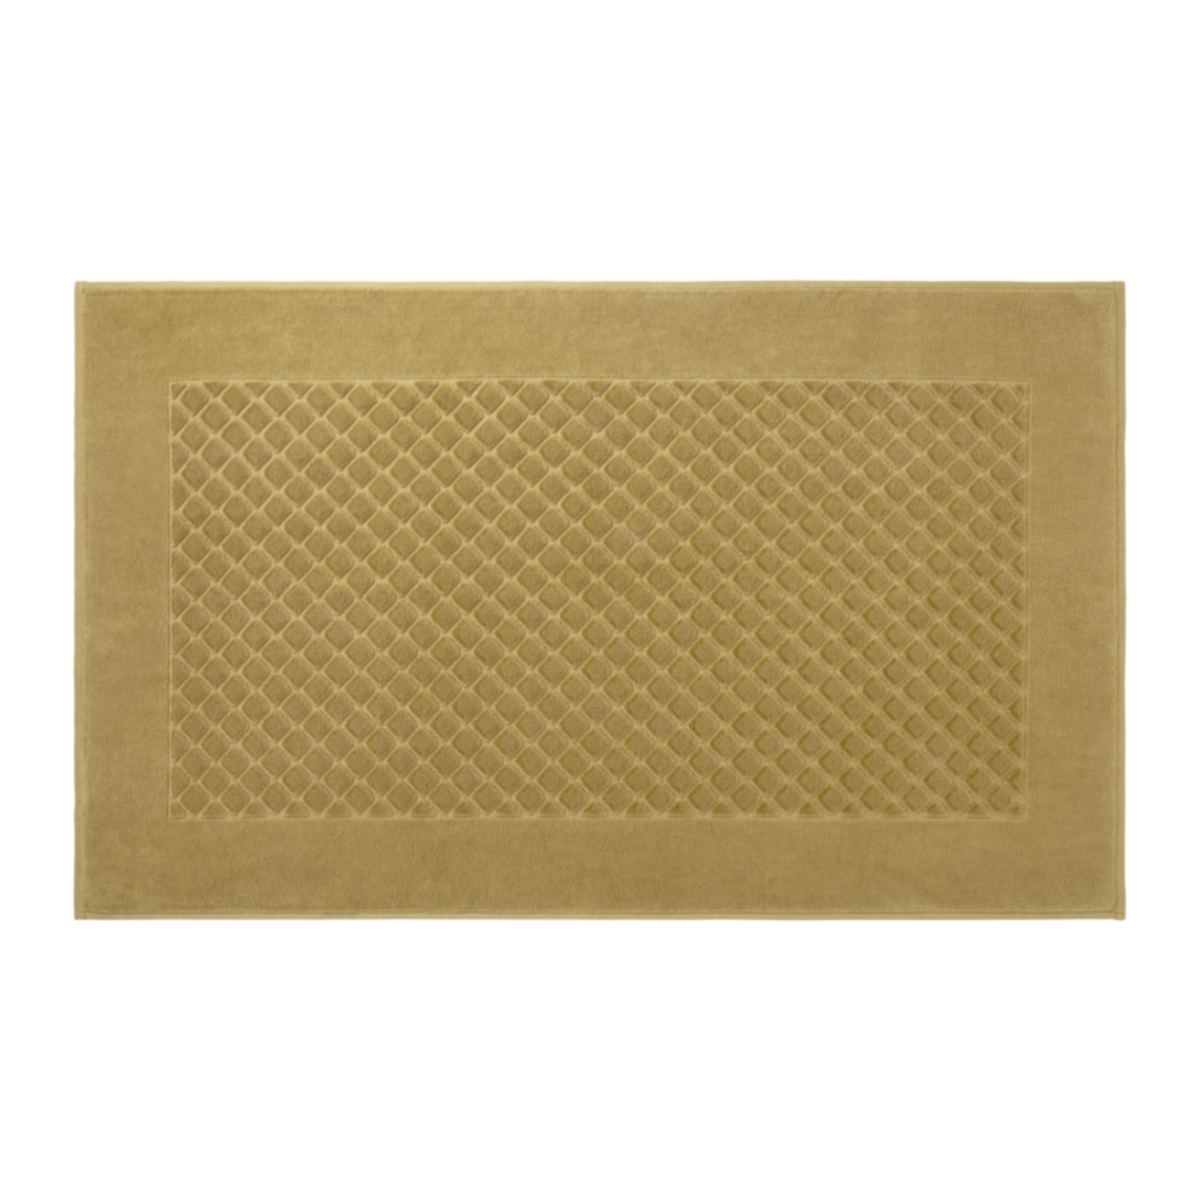 Bath Mat of Yves Delorme Etoile Bath Collection in Bronze Color